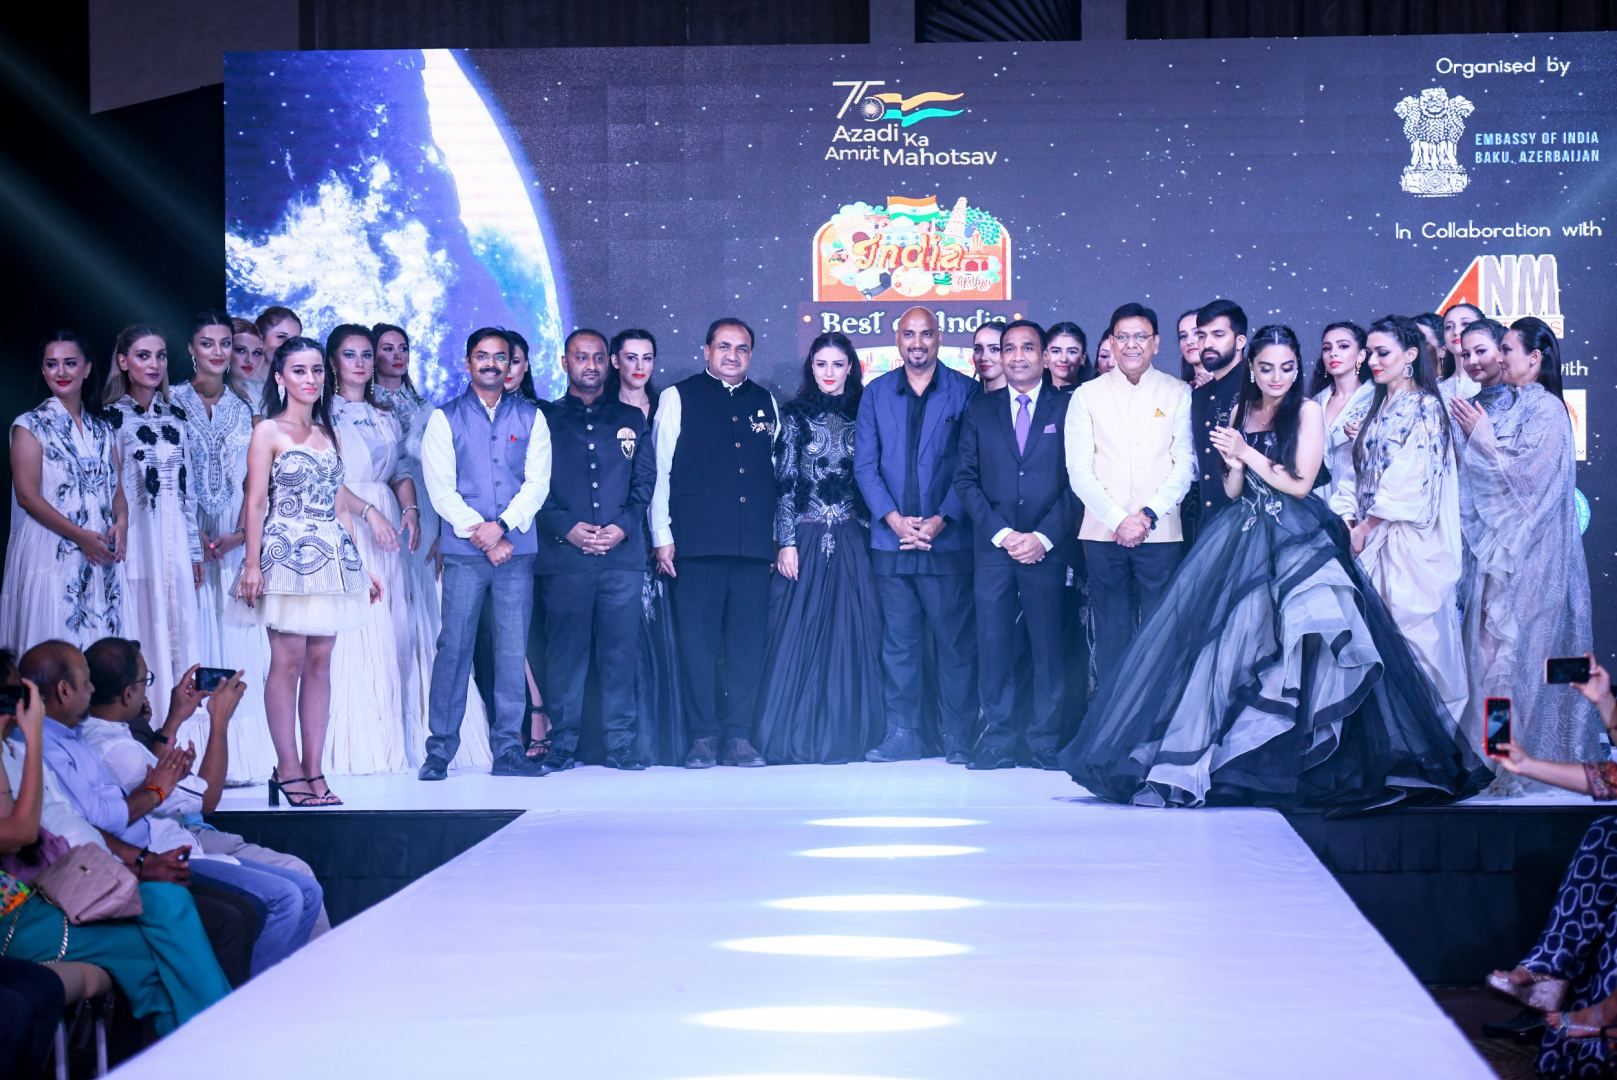 Embassy of India organises Exclusive Fashion Show presenting “Indian Creativity on the Ramp” [PHOTO]